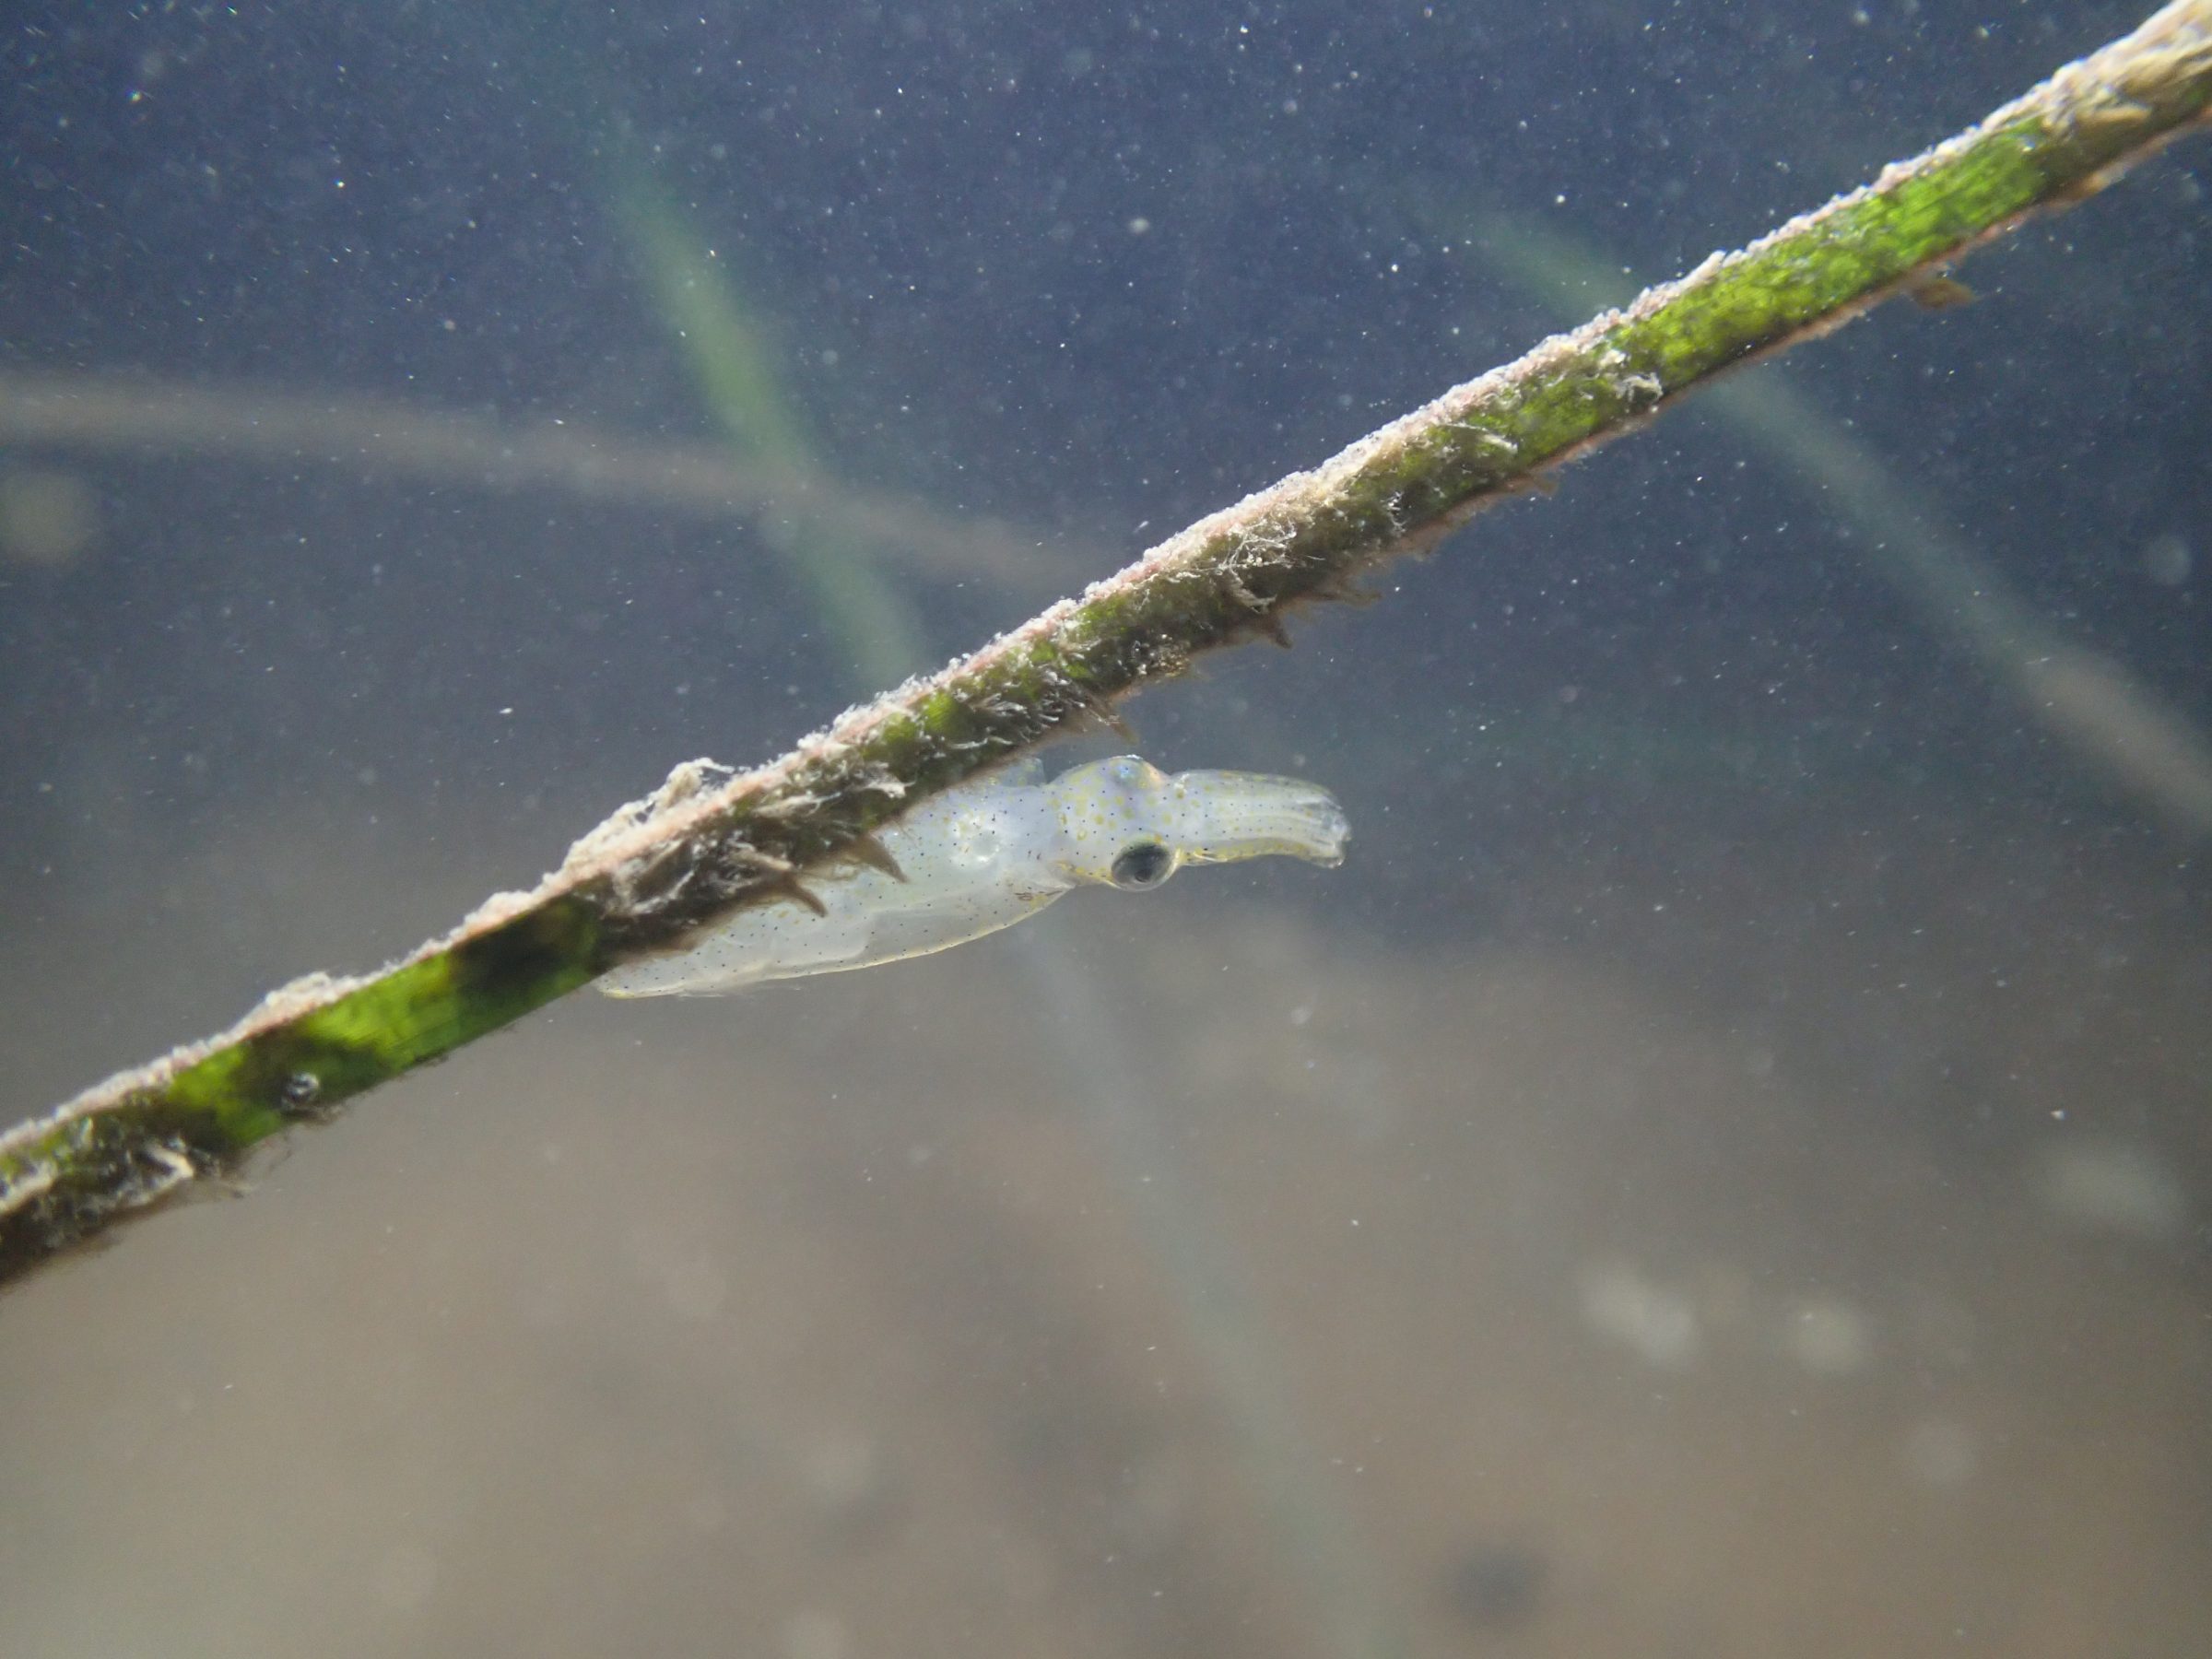 <p>A northern pygmy squid, the world’s smallest cephalopod, clinging to a piece of seagrass in Caofeidian (Image: Qingdao Marine Conservation Society)</p>